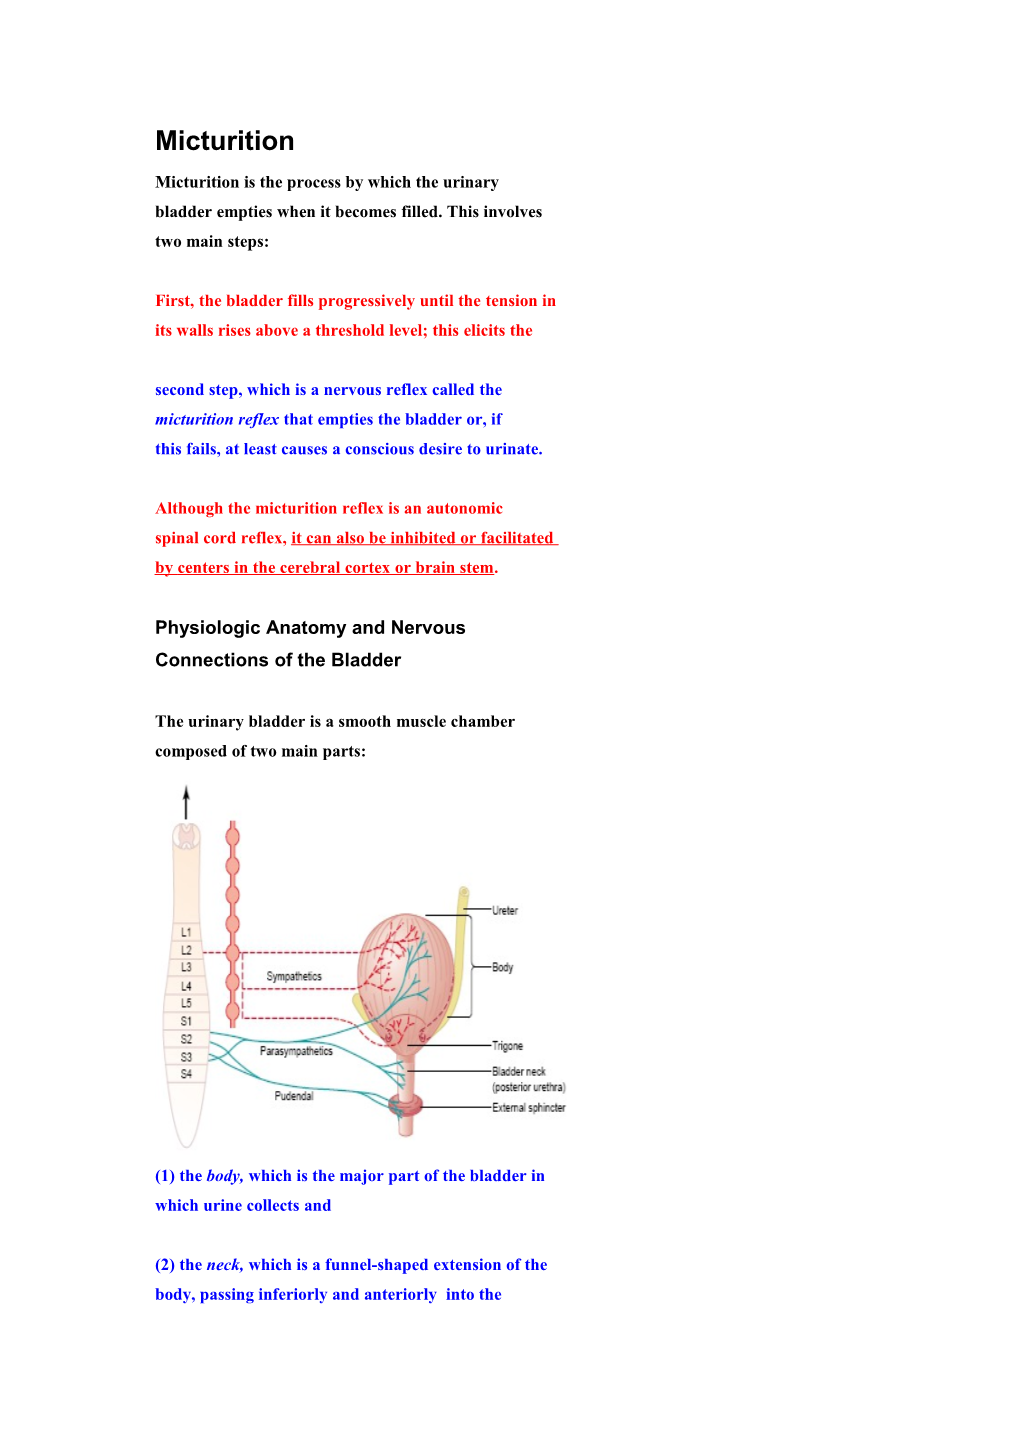 Micturition Is the Process by Which the Urinary Bladder Empties When It Becomes Filled